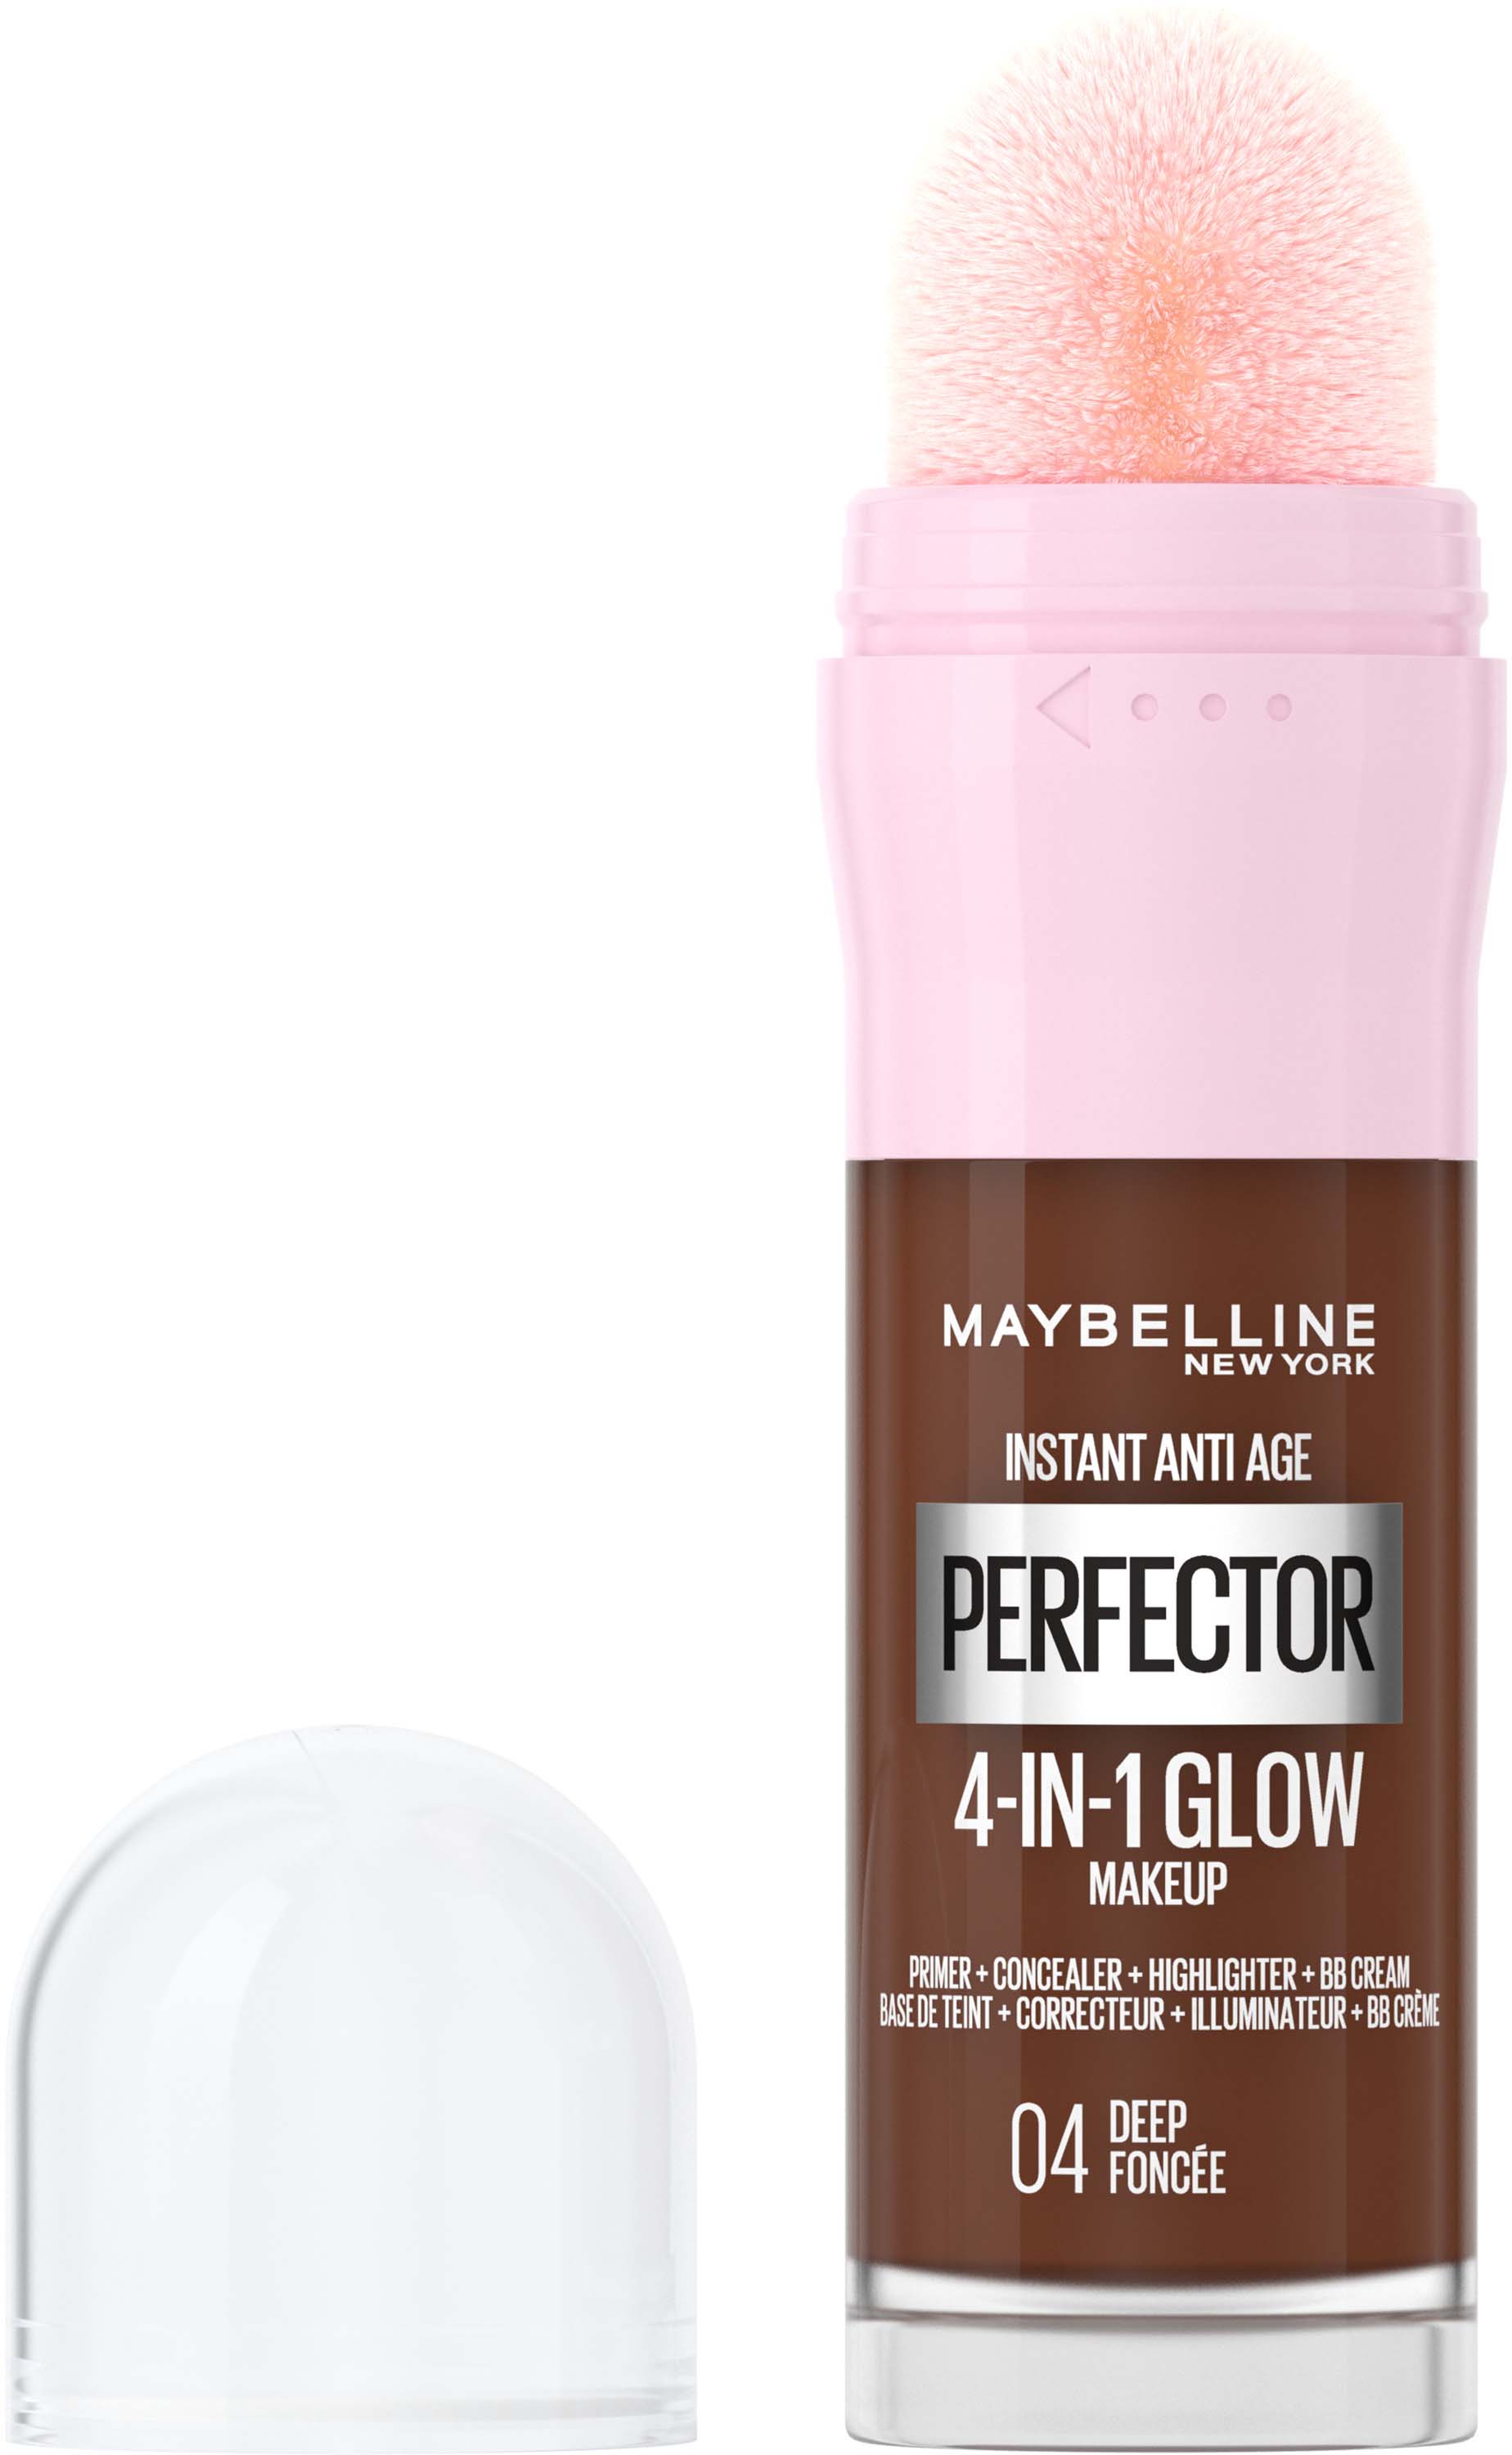 Medium Perfector York Makeup 03 New 4-in-1 Glow Instant Maybelline Anti-Age Deep